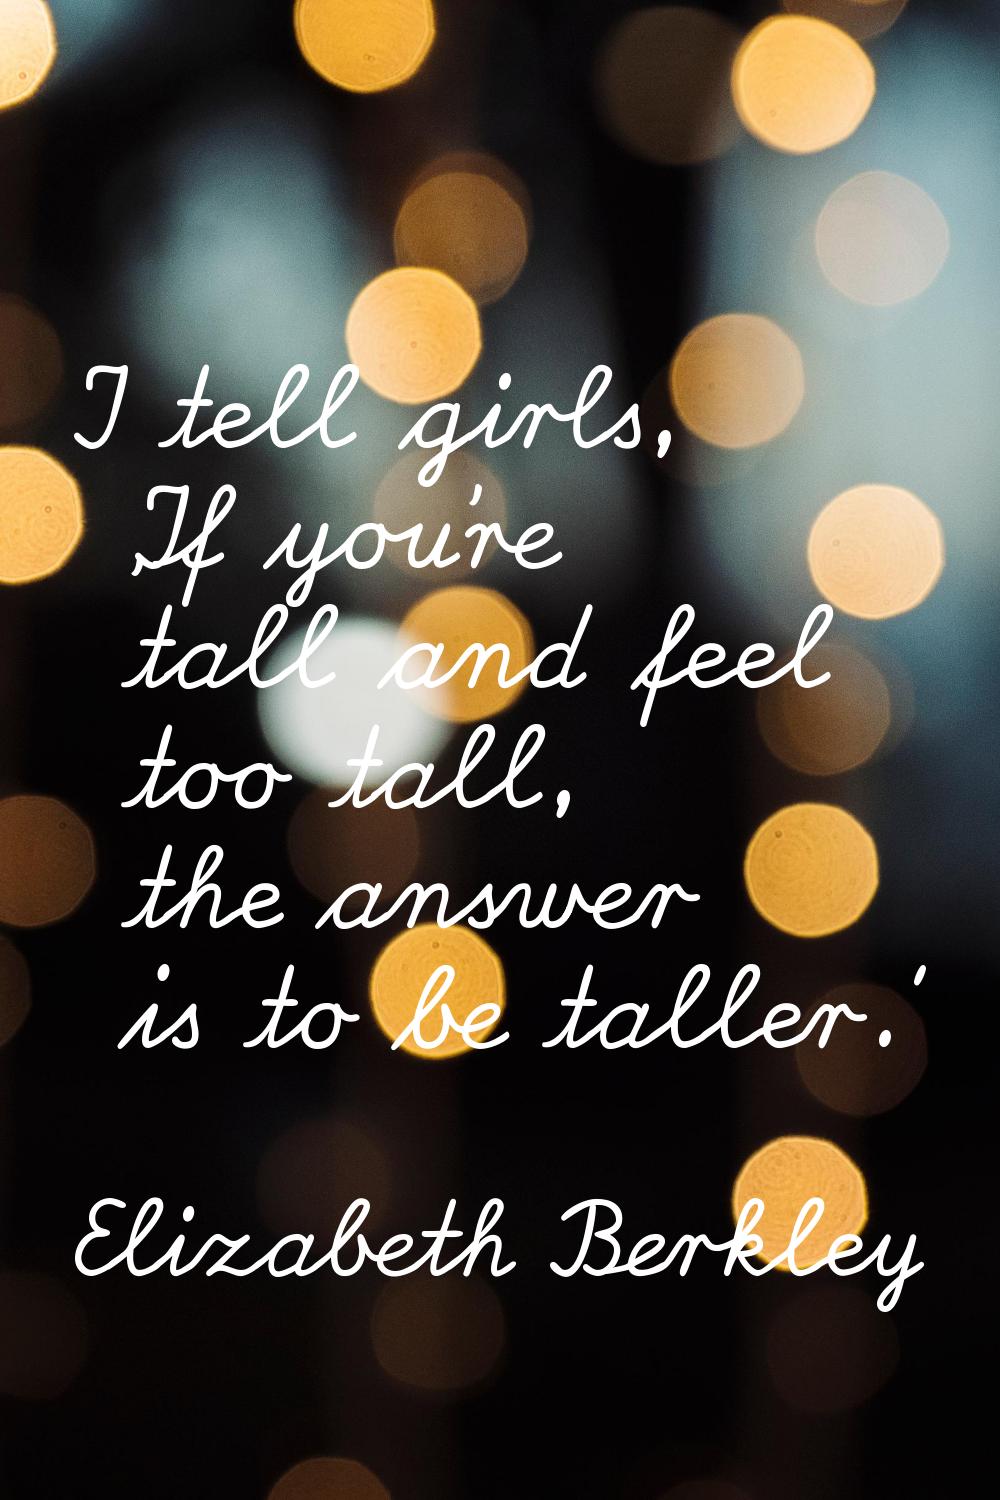 I tell girls, 'If you're tall and feel too tall, the answer is to be taller.'